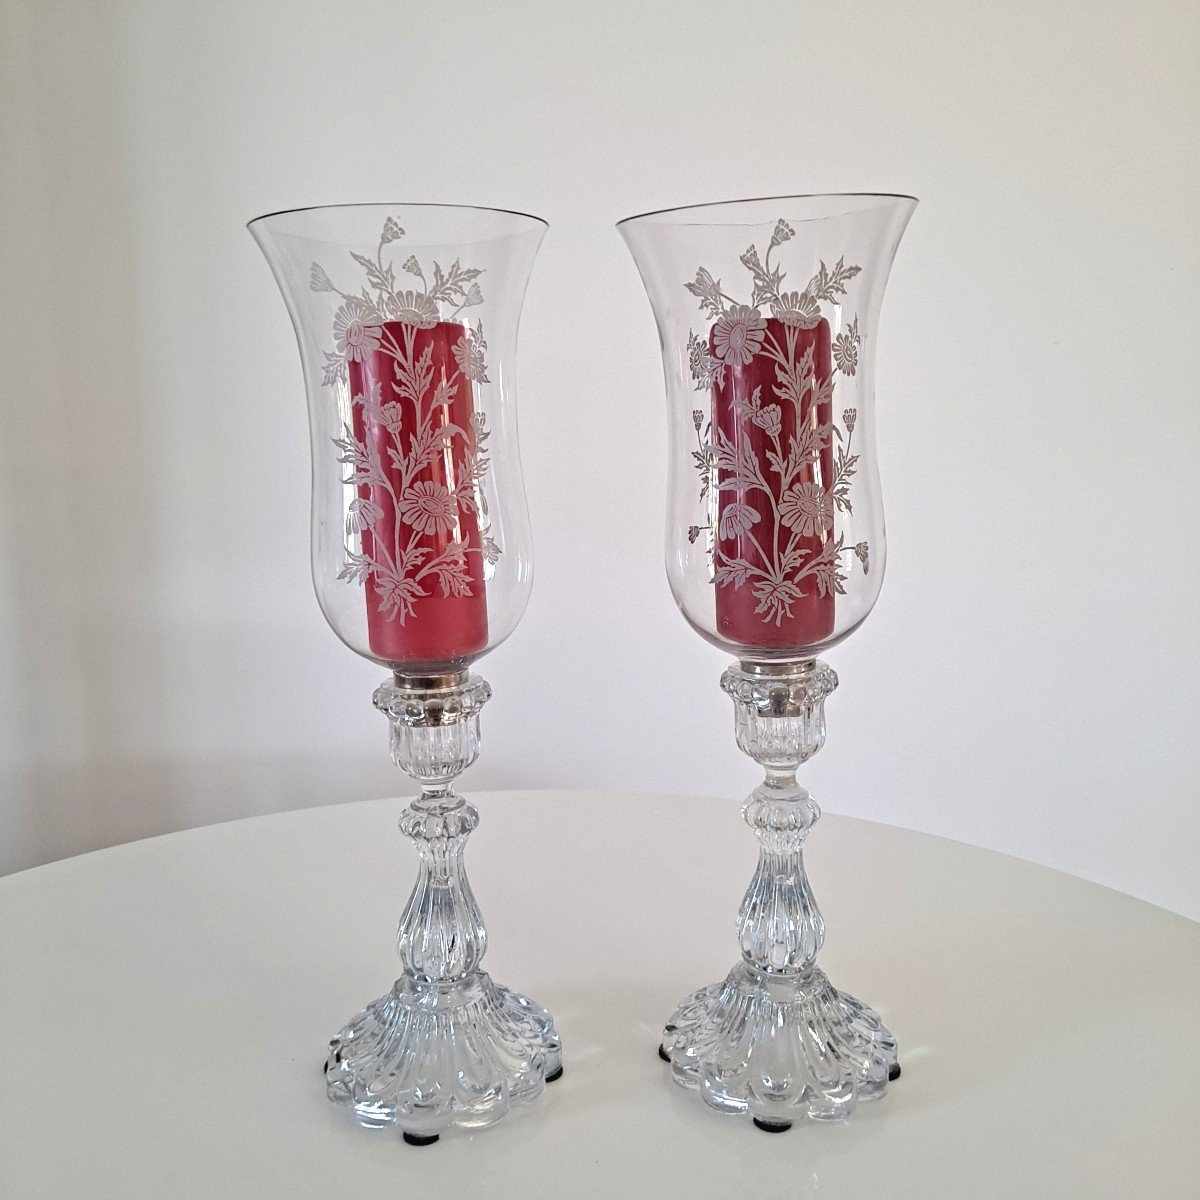 Pair Of Engraved Crystal Candle Holders